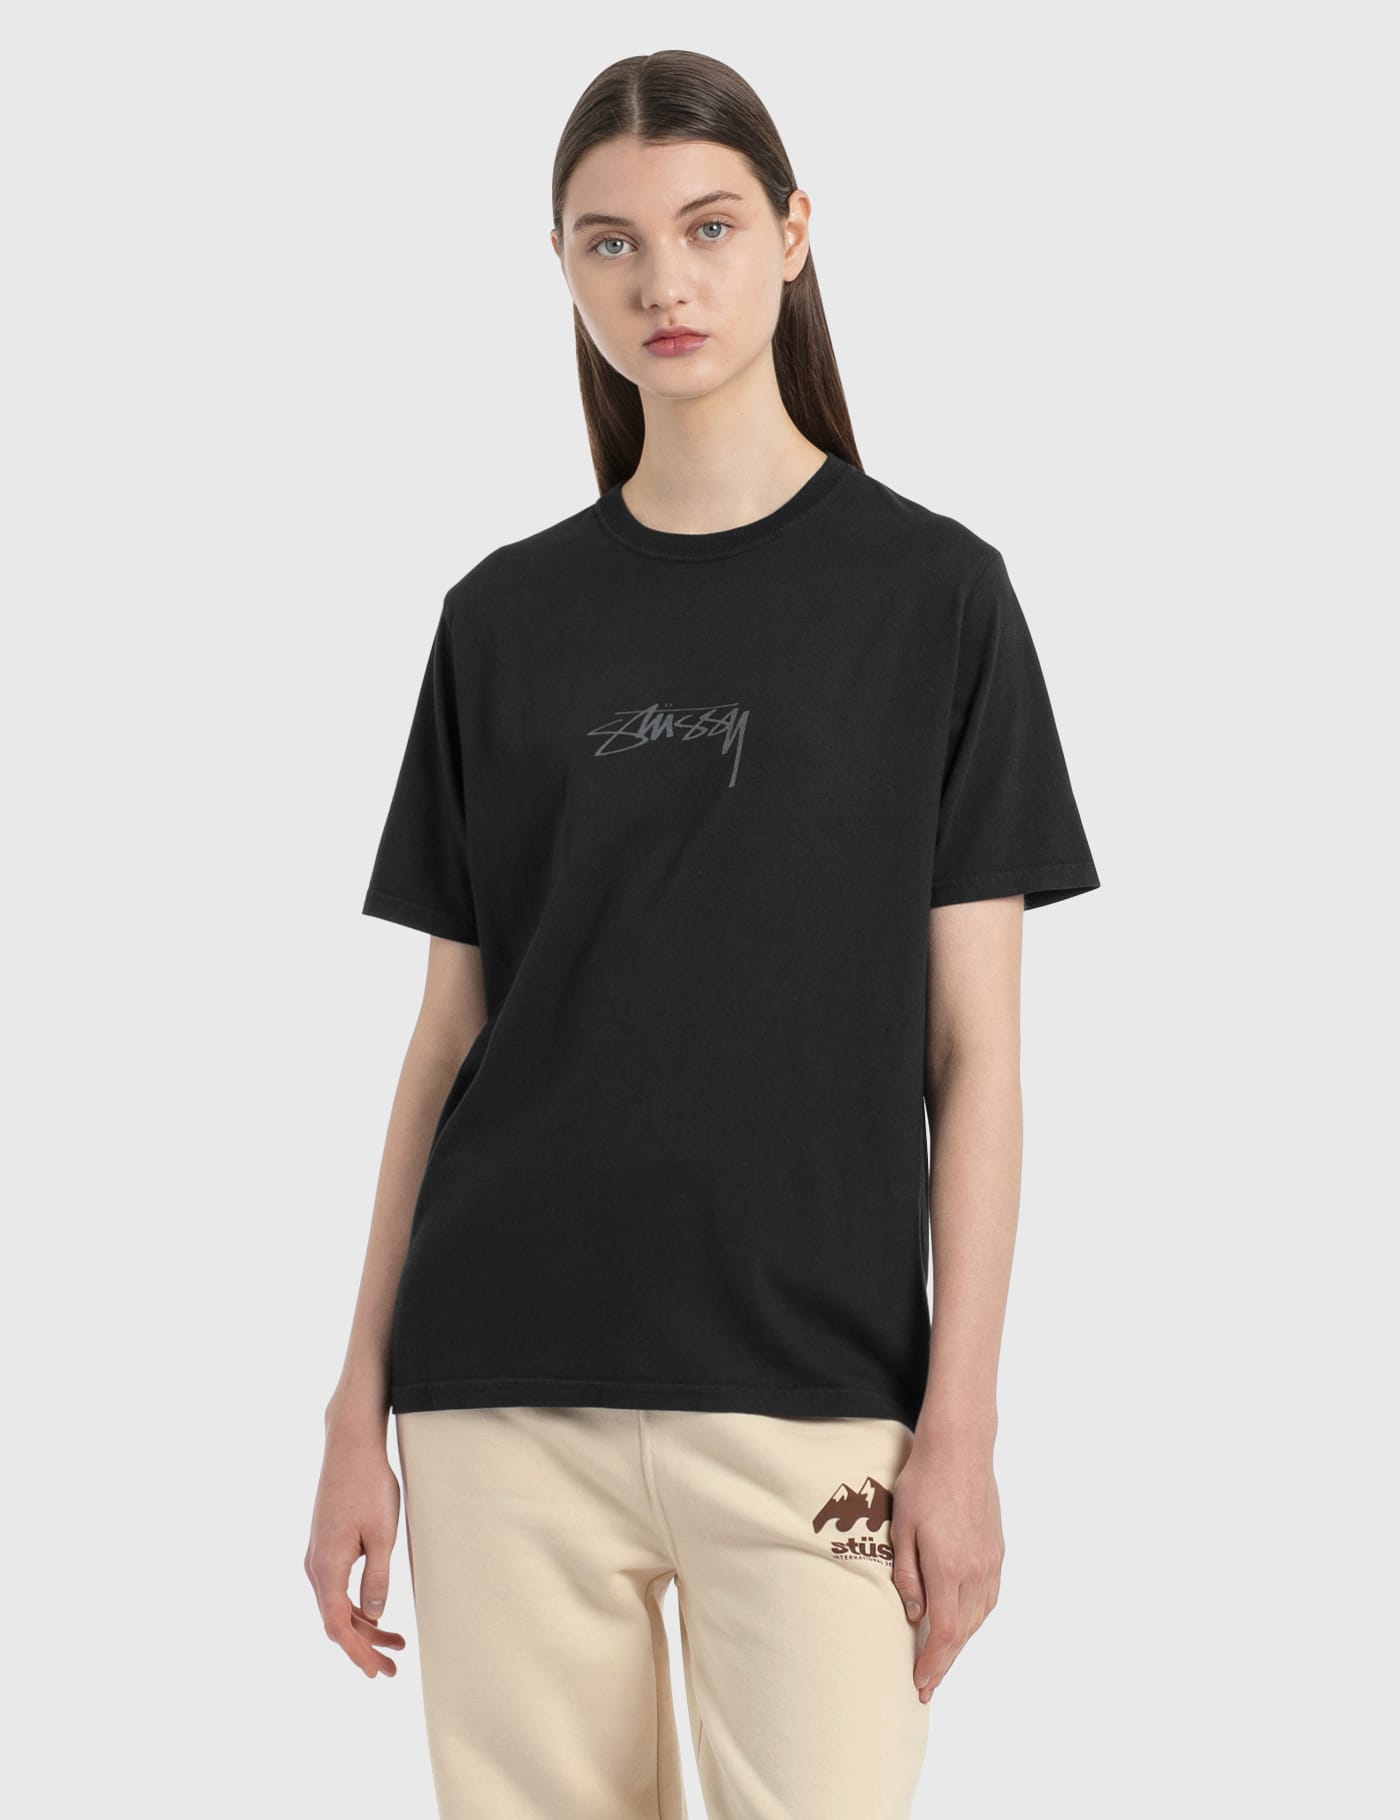 Stussy - Increase The Peace T-Shirt | HBX